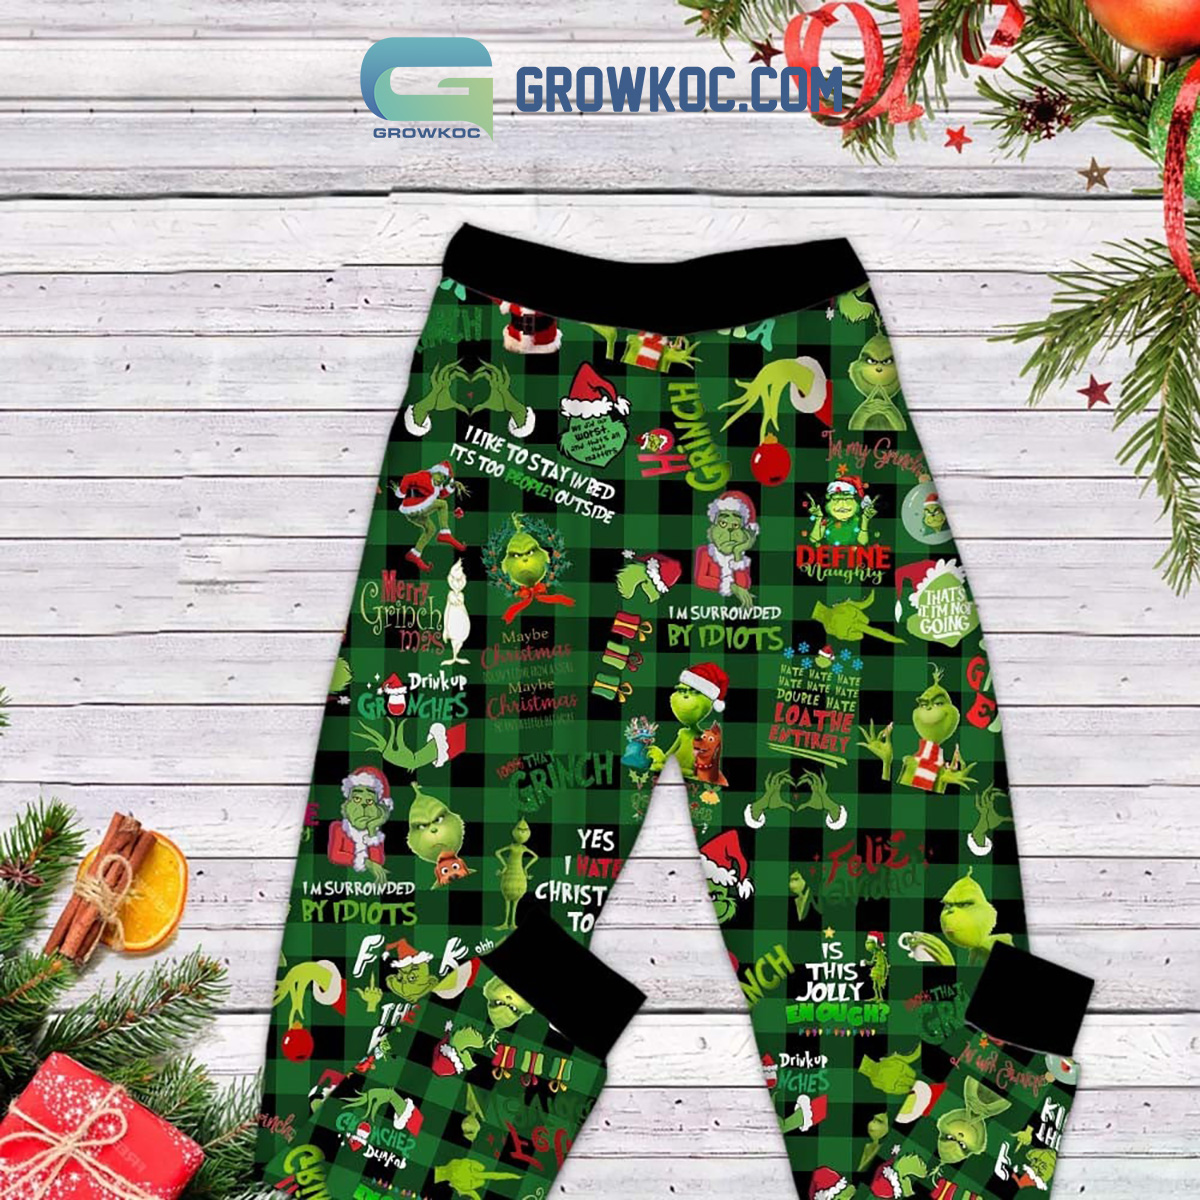 The Best of The Grinch Collection, Pajamas, Sweaters & Homeware